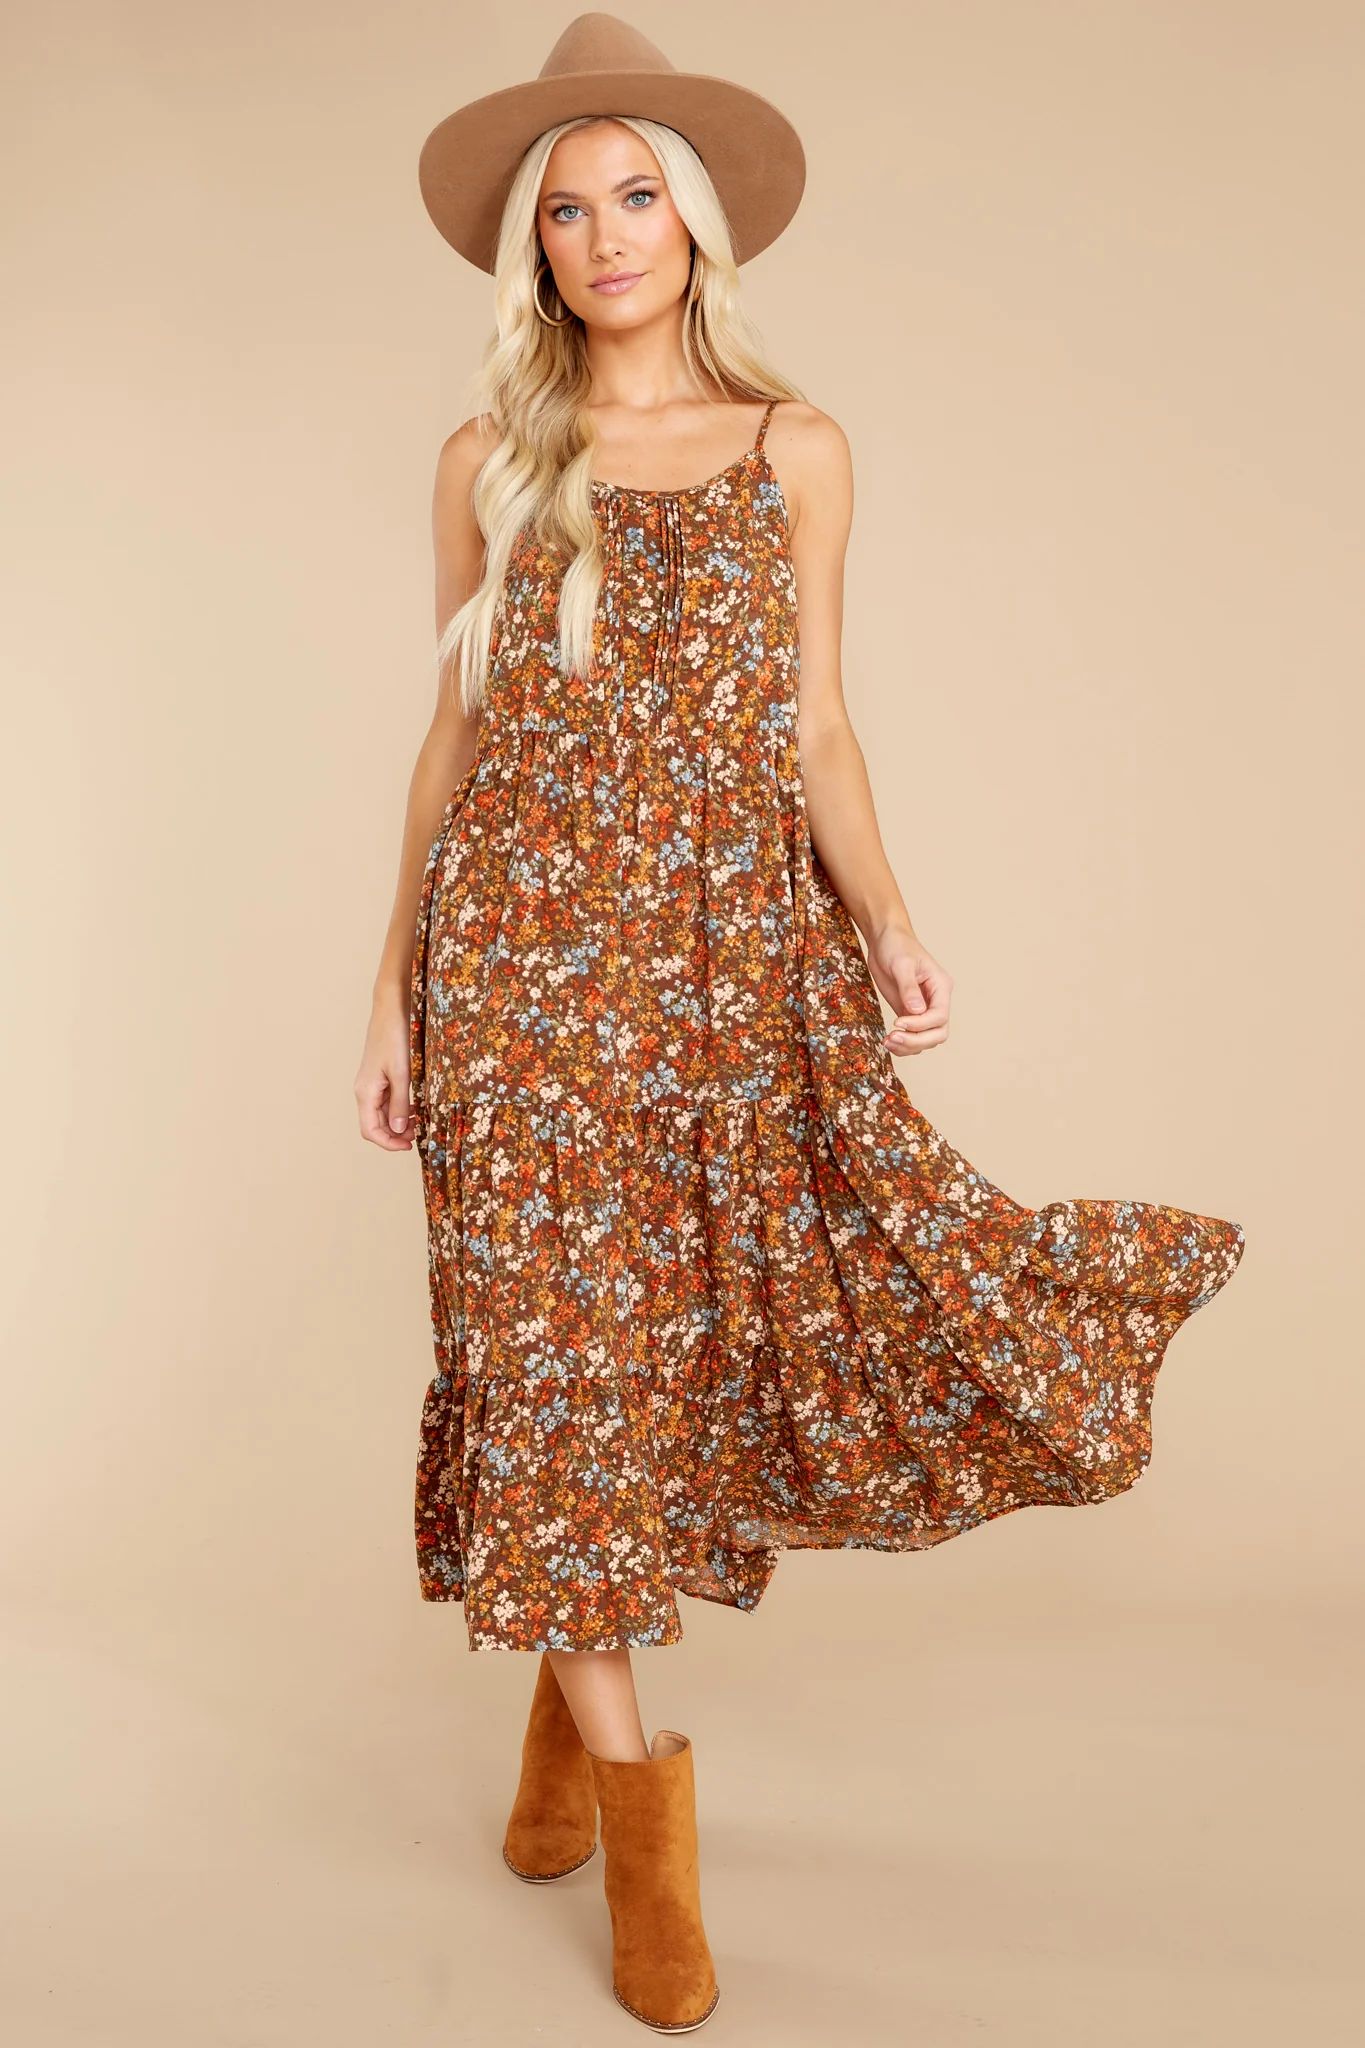 Harvest Wishes Light Brown Floral Maxi Dress | Red Dress 